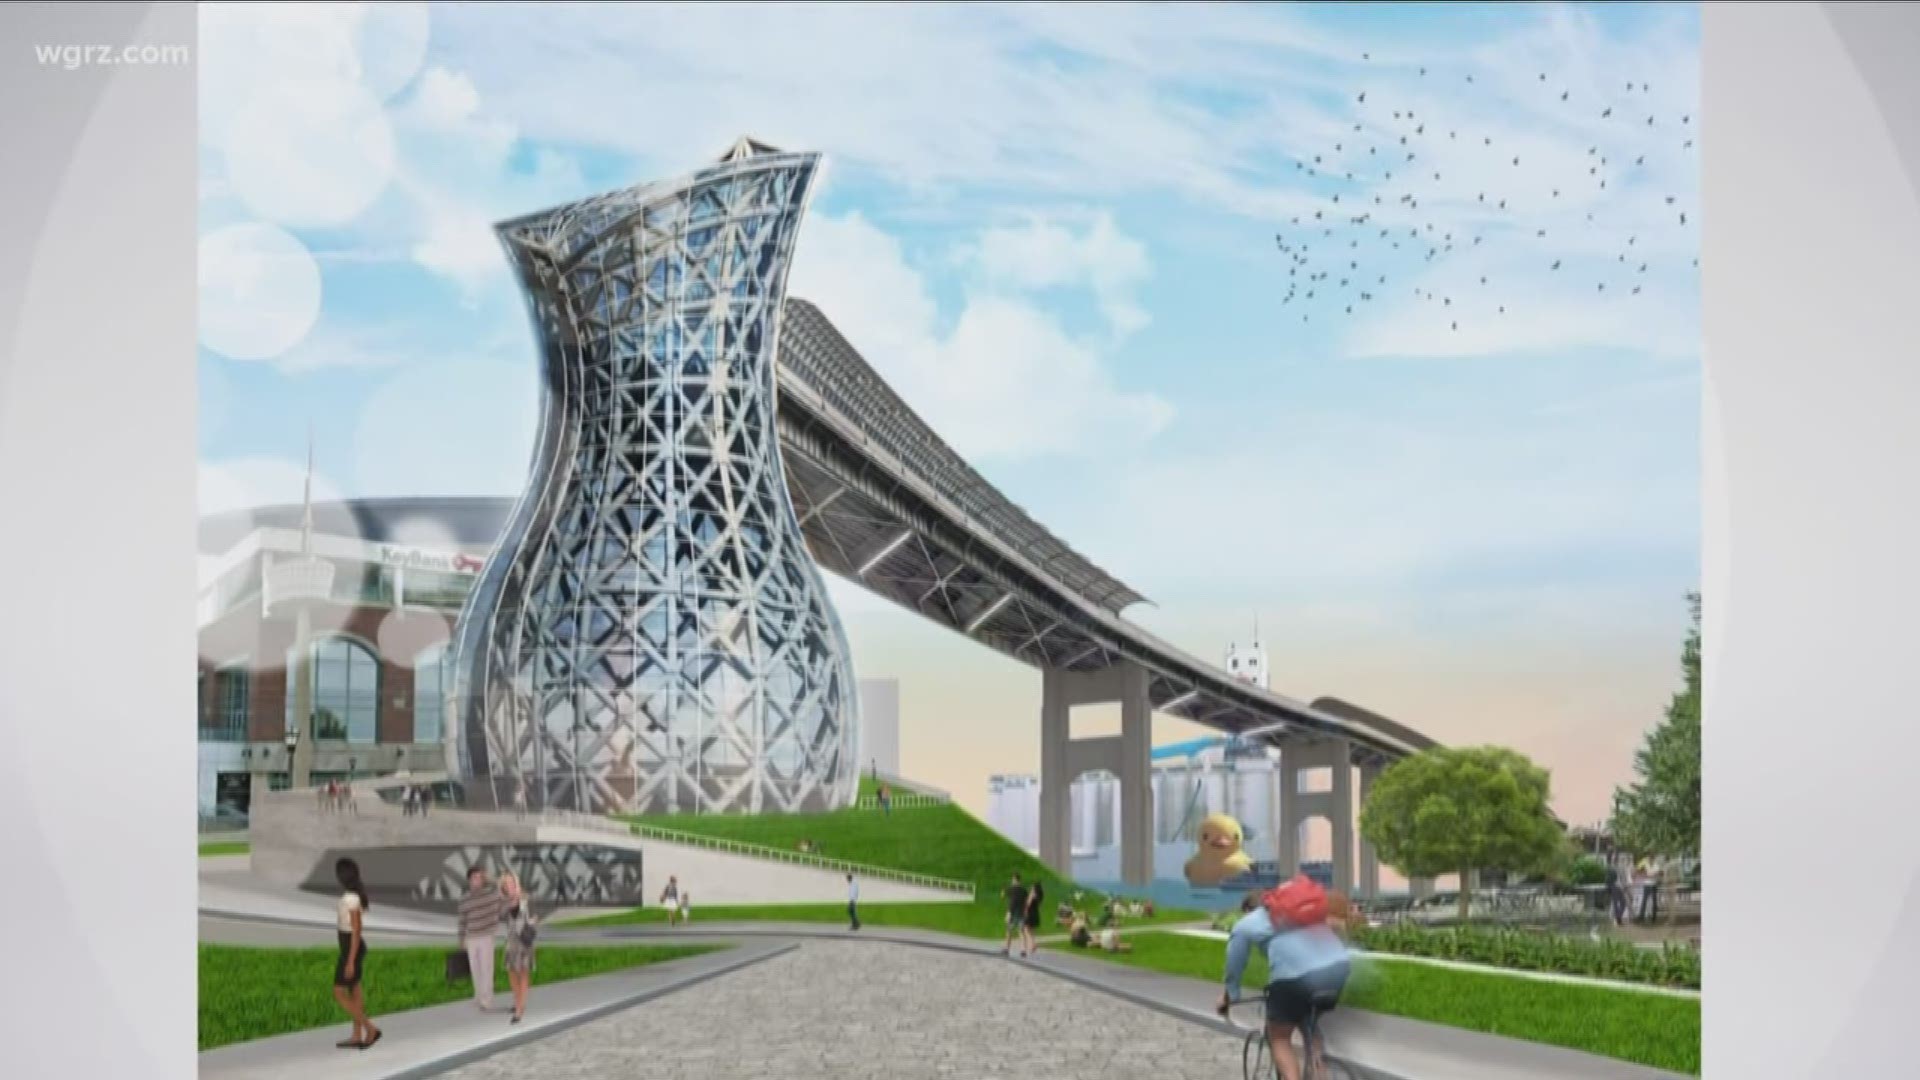 After months of review, state and local officials have chosen what they say is the best design to re-purpose Buffalo's Skyway.